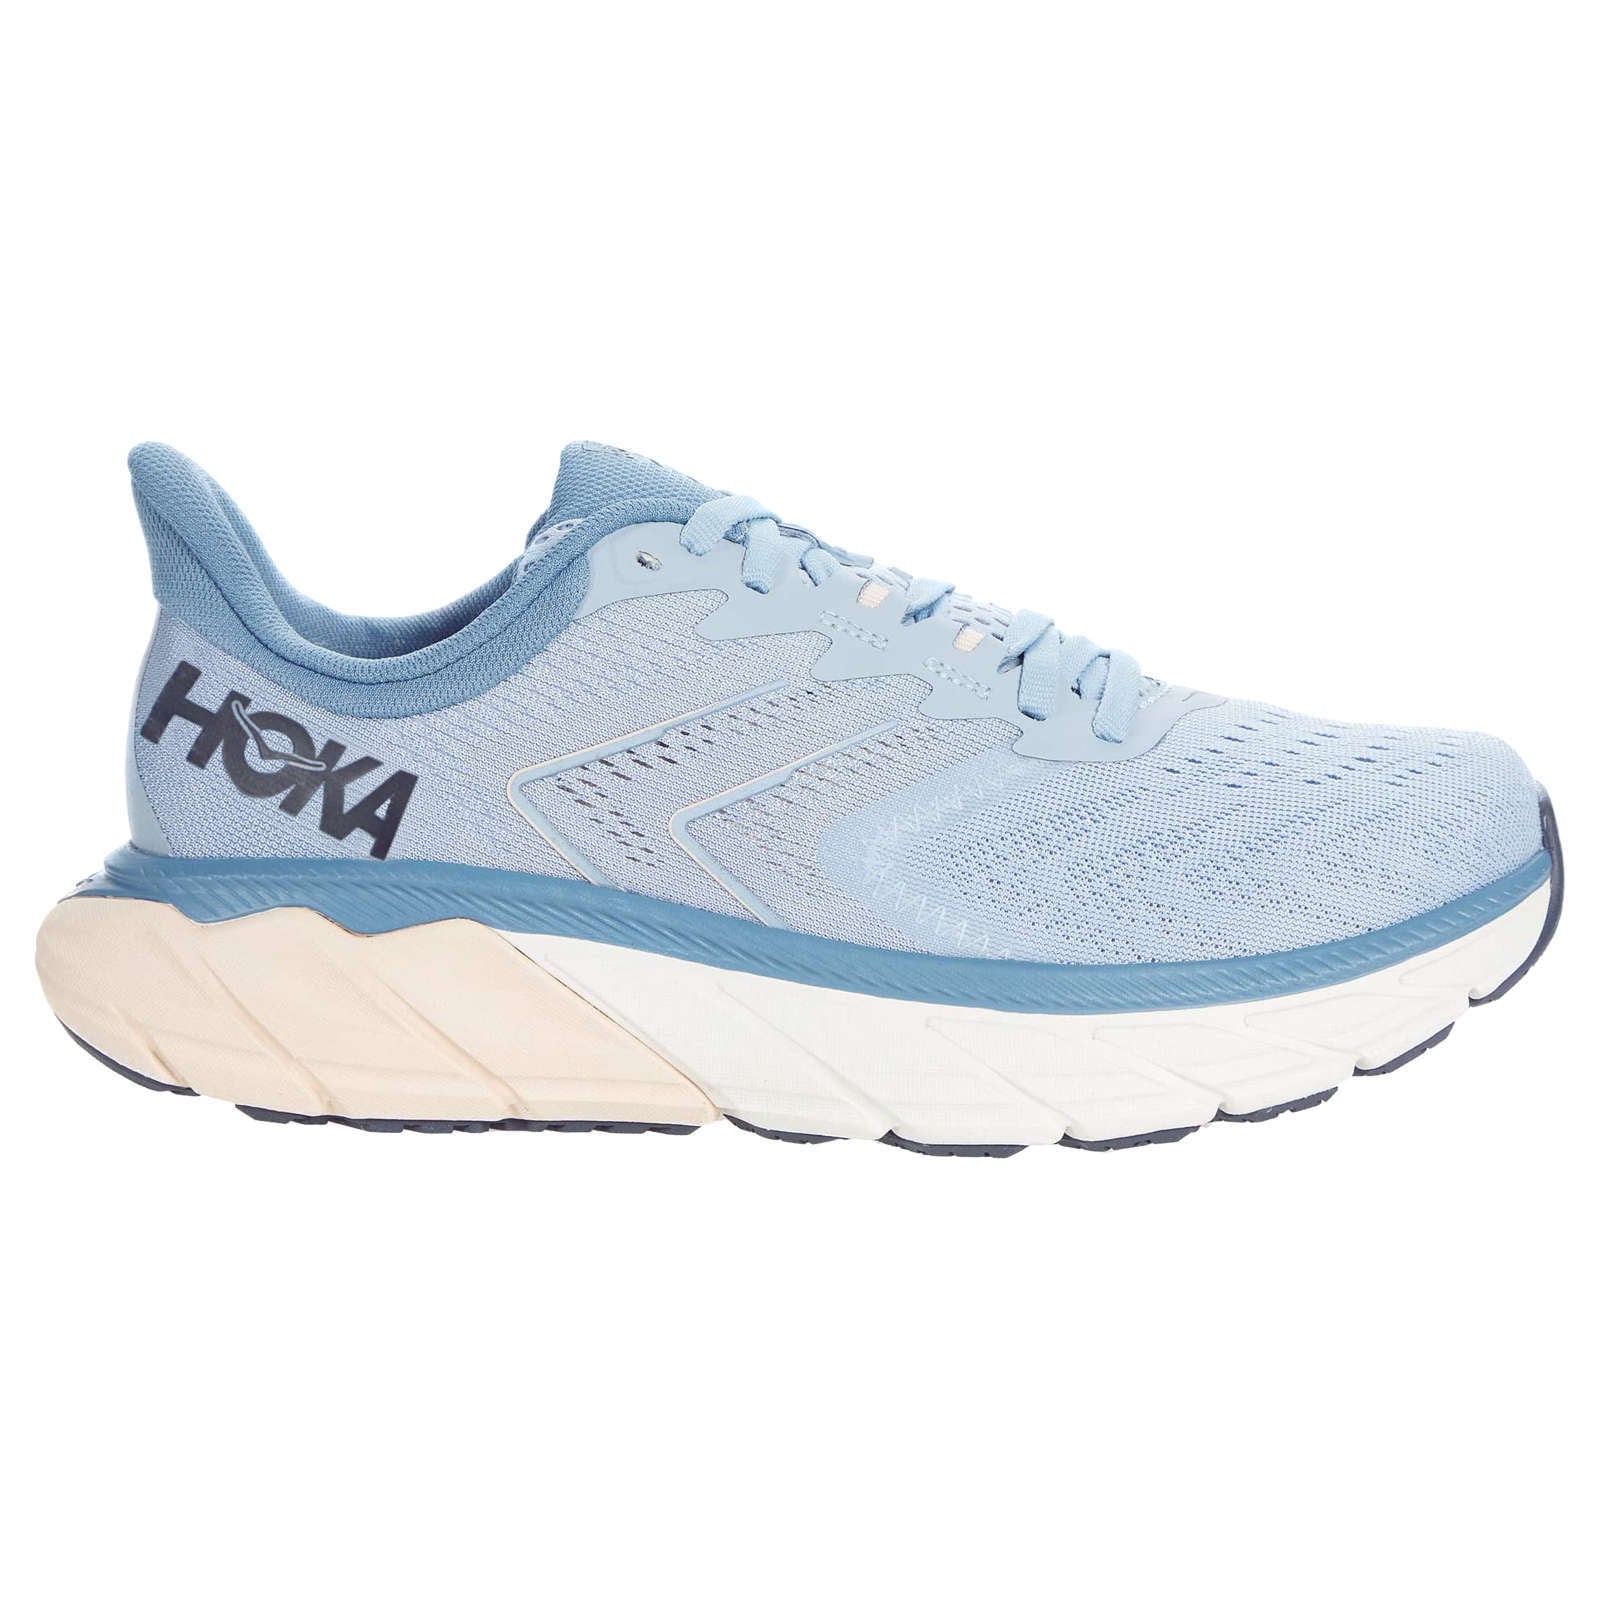 Hoka One One Arahi 5 Synthetic Textile Women's Low-Top Road Running Trainers#color_blue fog provincial blue